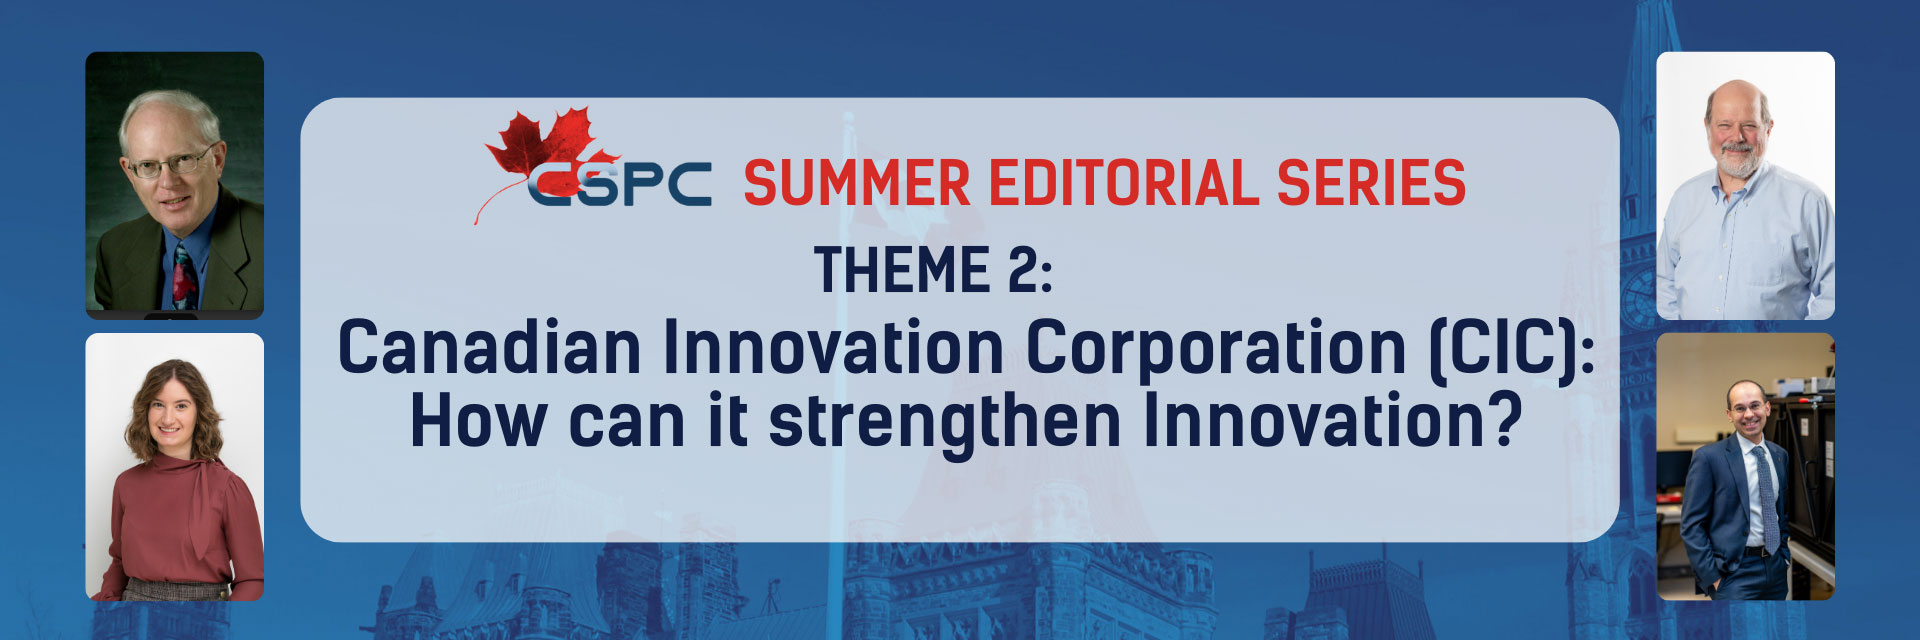 Canadian Innovation Corporation editorial series banner